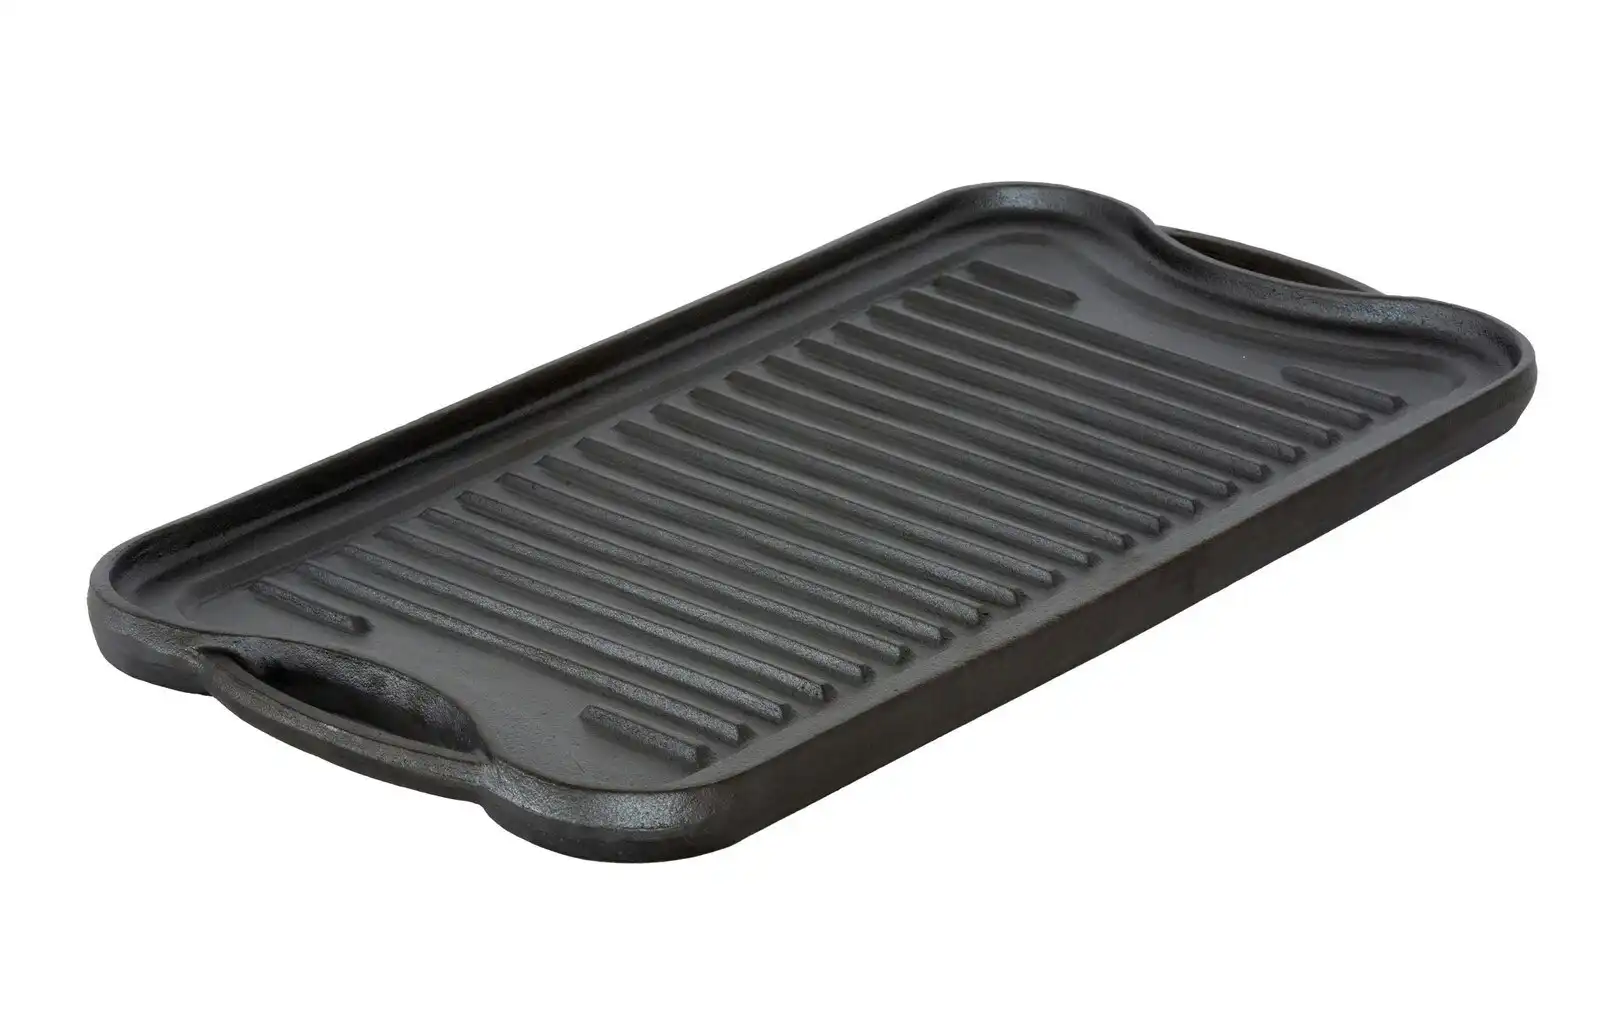 Oil-seasoned Ready to use 50.7x25.8cm Reversible Cast Iron Grill - Black